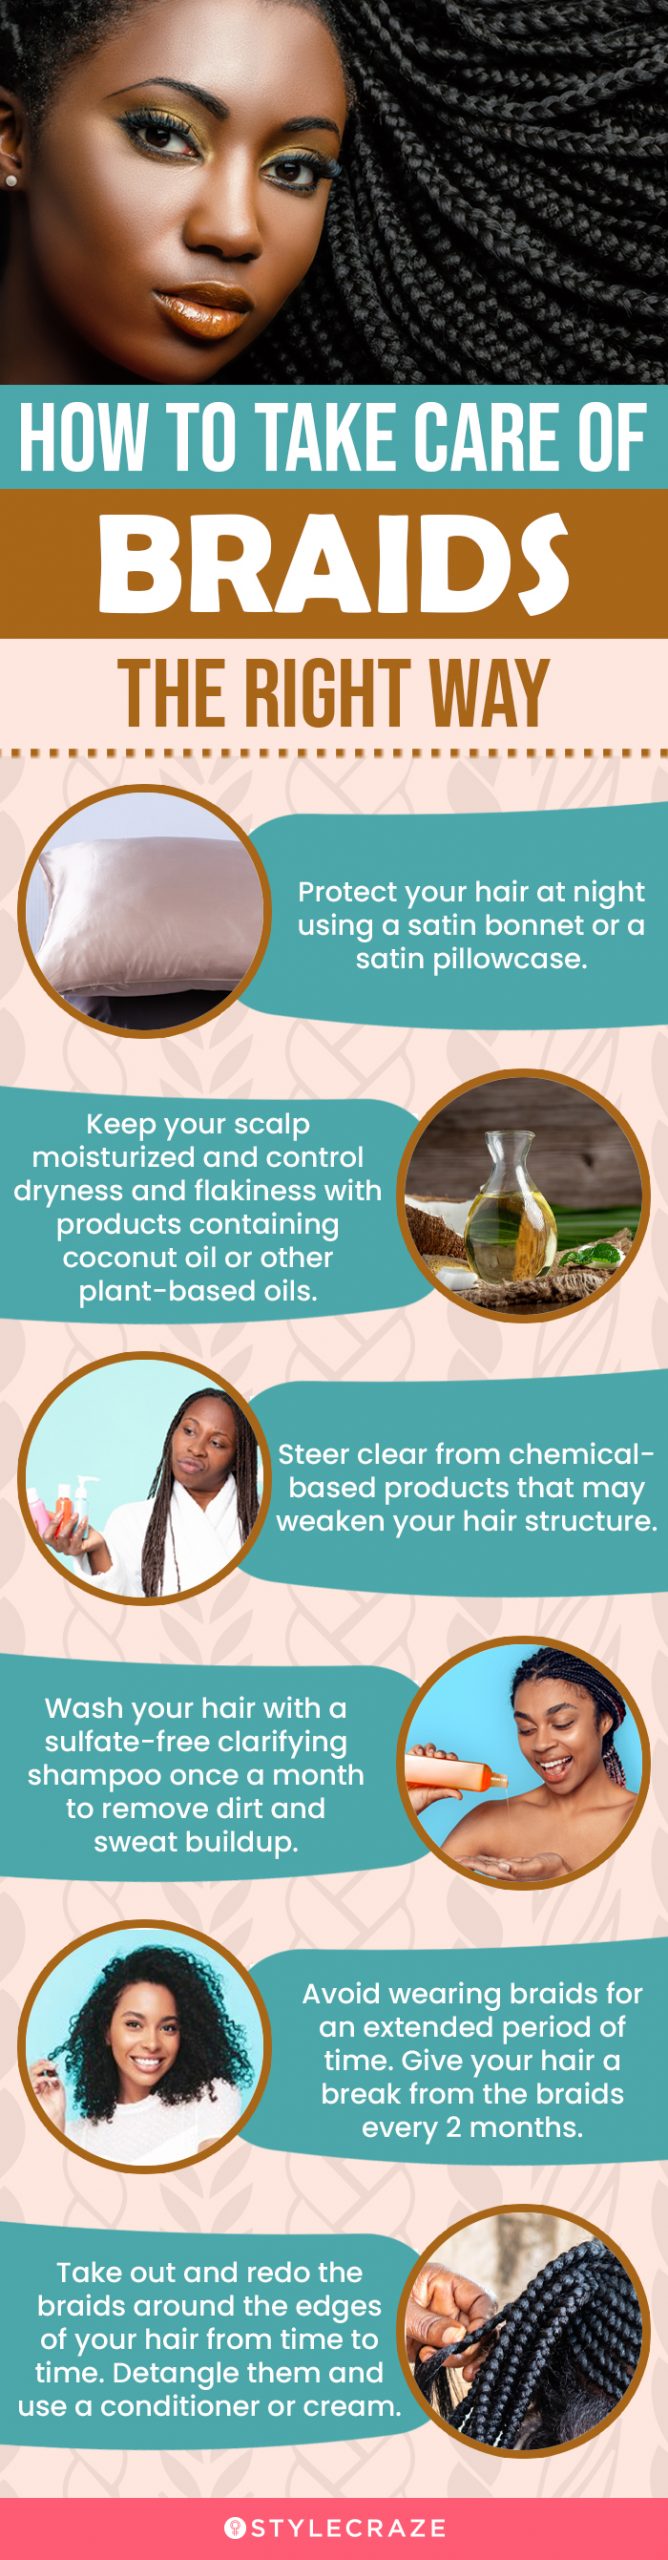 Tips To Take Care Of Braids The Right Way [infographic]